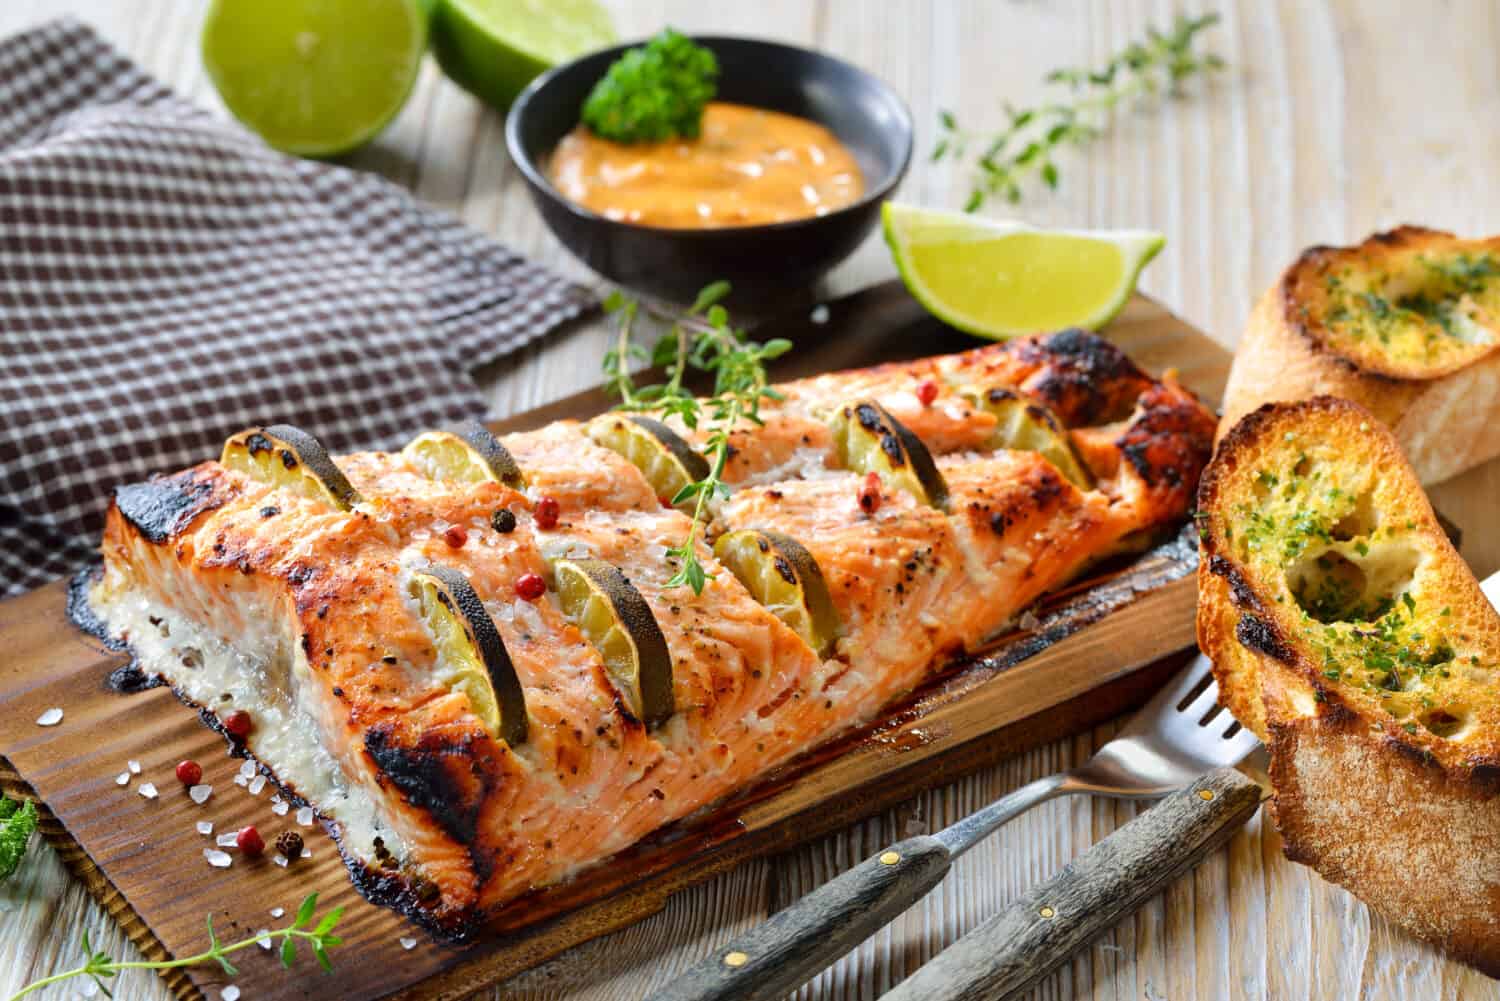 Juicy salmon fillet with lime slices on a cedar wood grilling plank fresh from the kettle grill